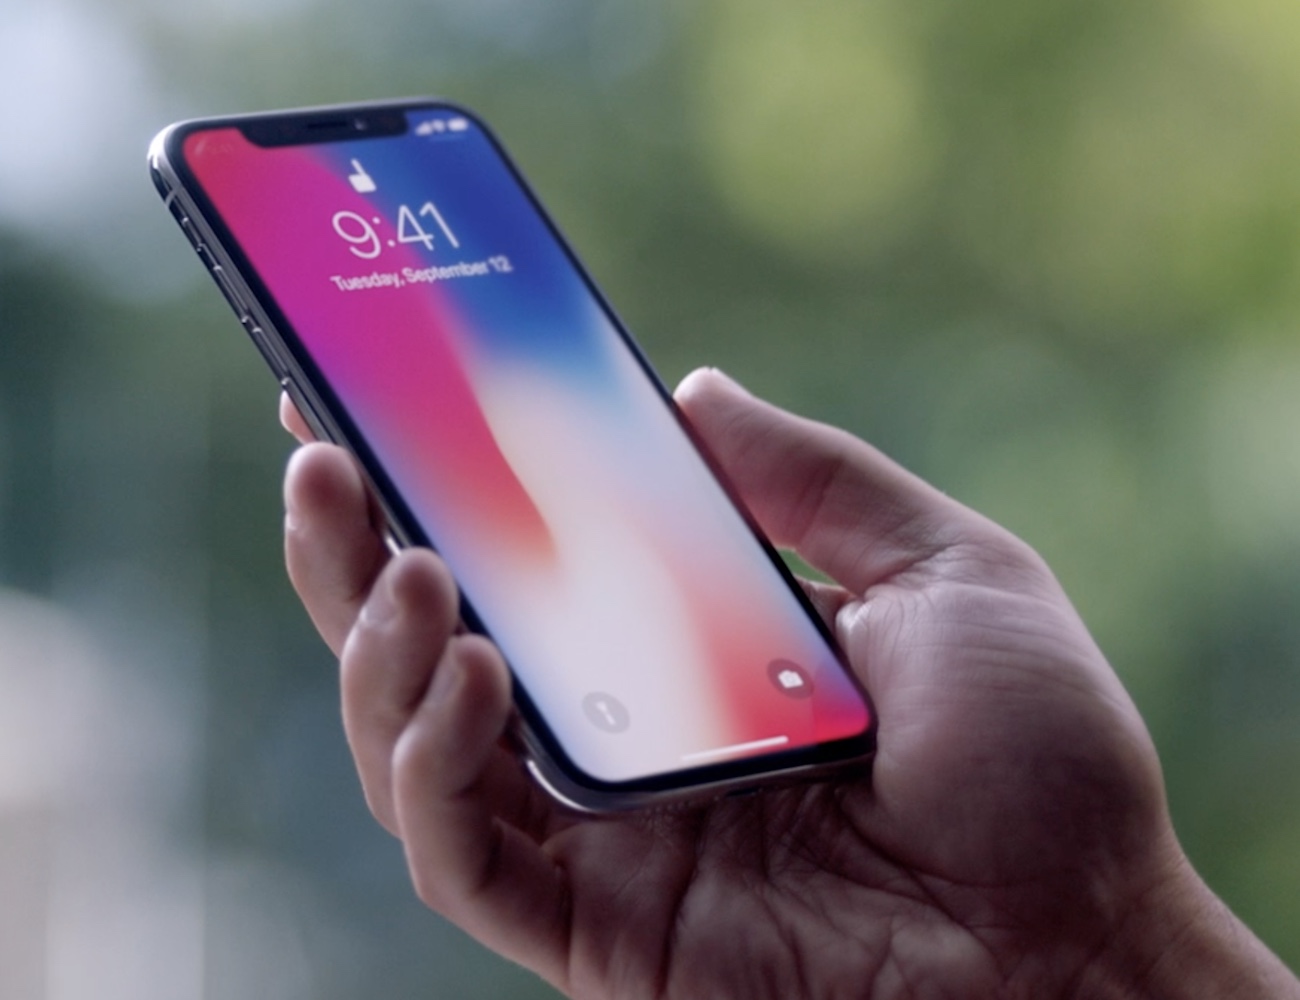 Apple Special Event Highlights – iPhone X, iPhone 8, Apple TV 4K and the Apple Watch Series 3